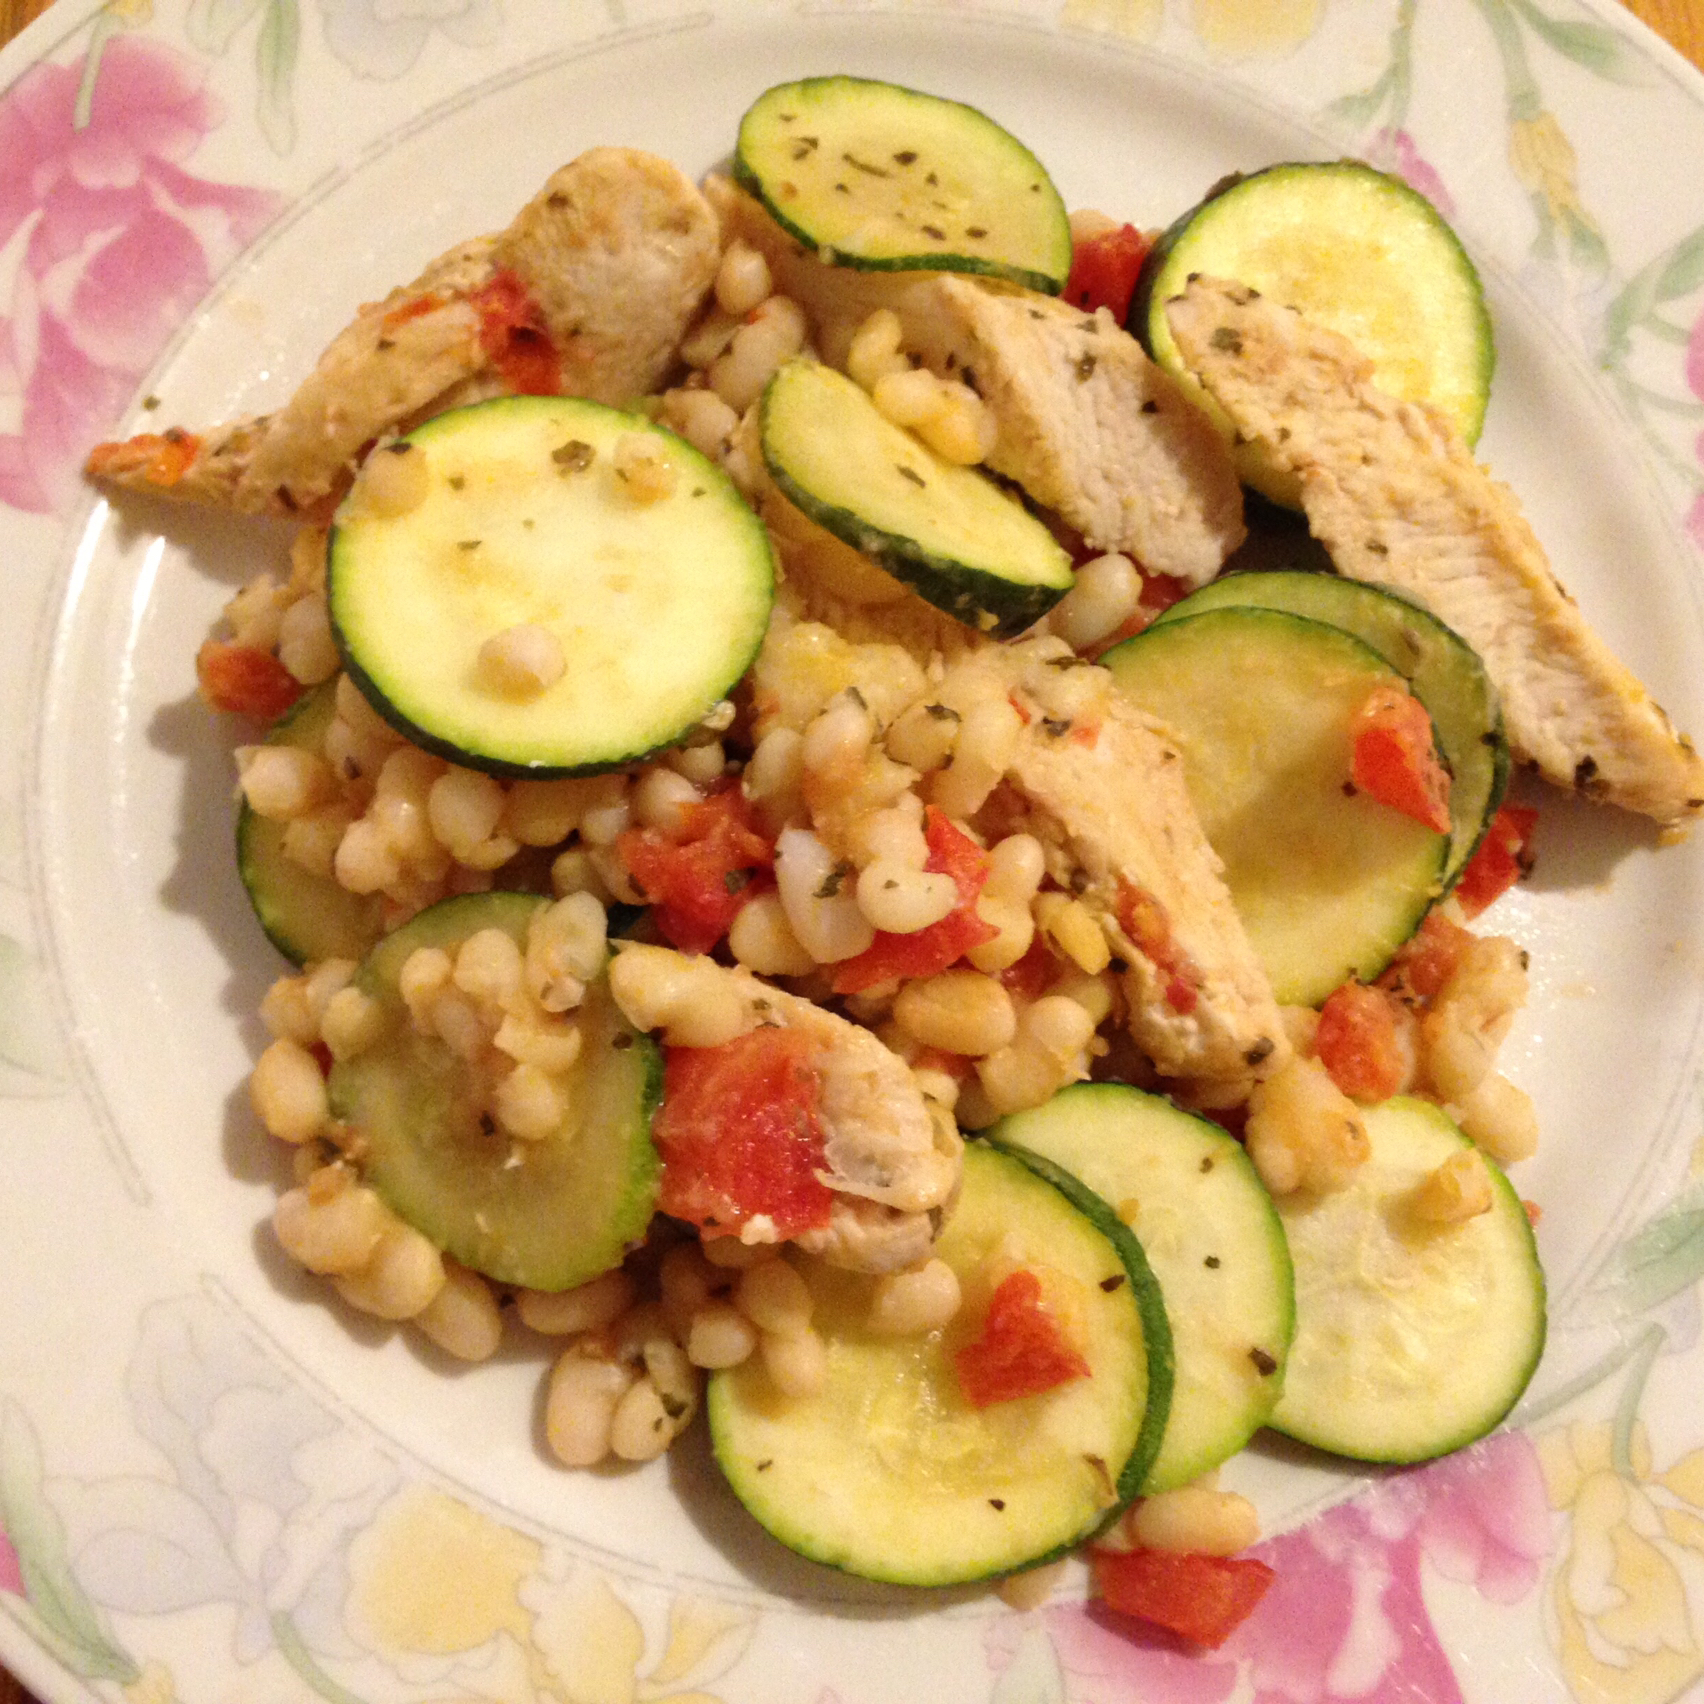 <p>This one-skillet recipe features canned white beans with chicken breasts, garlic, zucchini, and chopped tomato. "This was delicious and so easy," says HolisticMomma. "Never thought it would be as flavorful as it was. Love that it's very healthy too!"</p>
                          